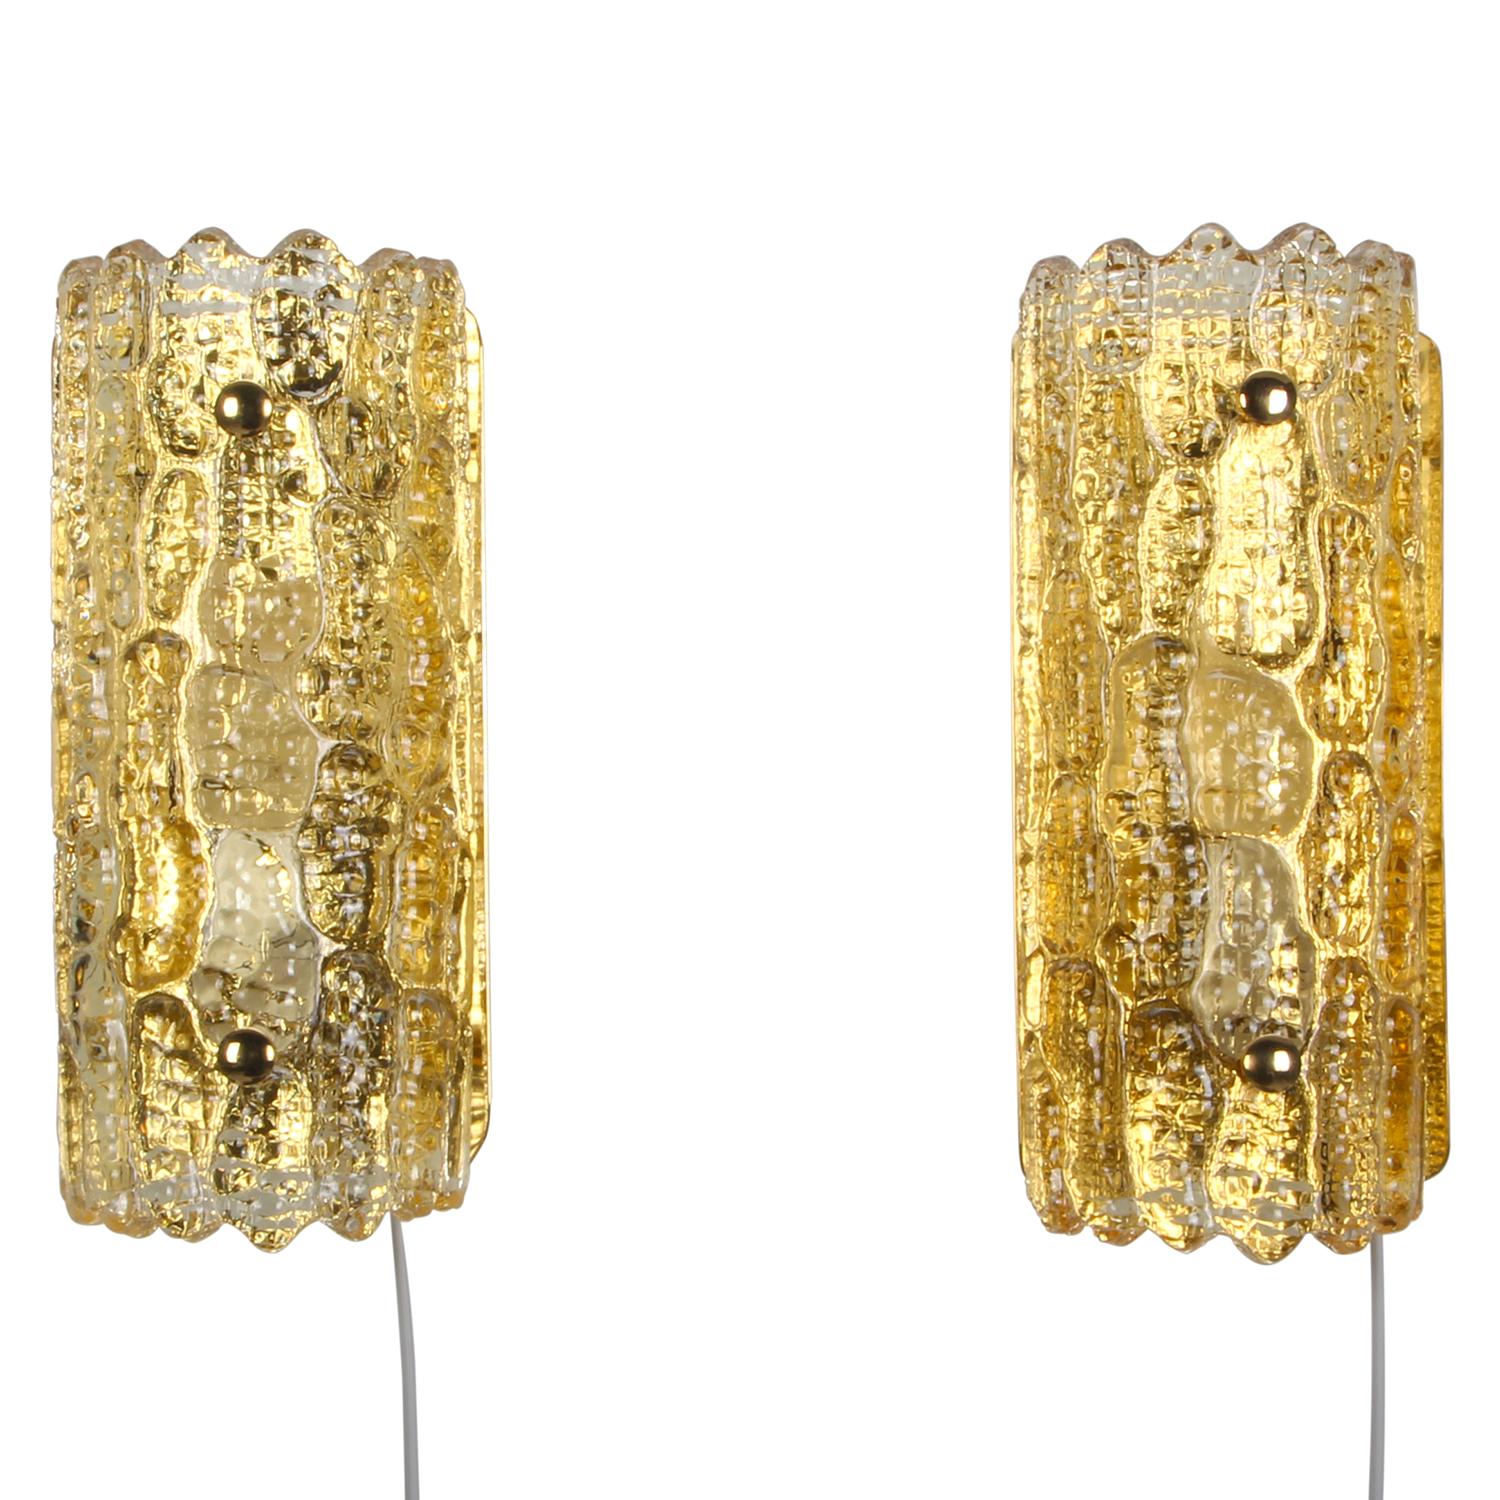 Scandinavian Modern Gefion Sconces, Pair Crystal Glass Wall Lights by Lyfa/Orrefors in the 1960s